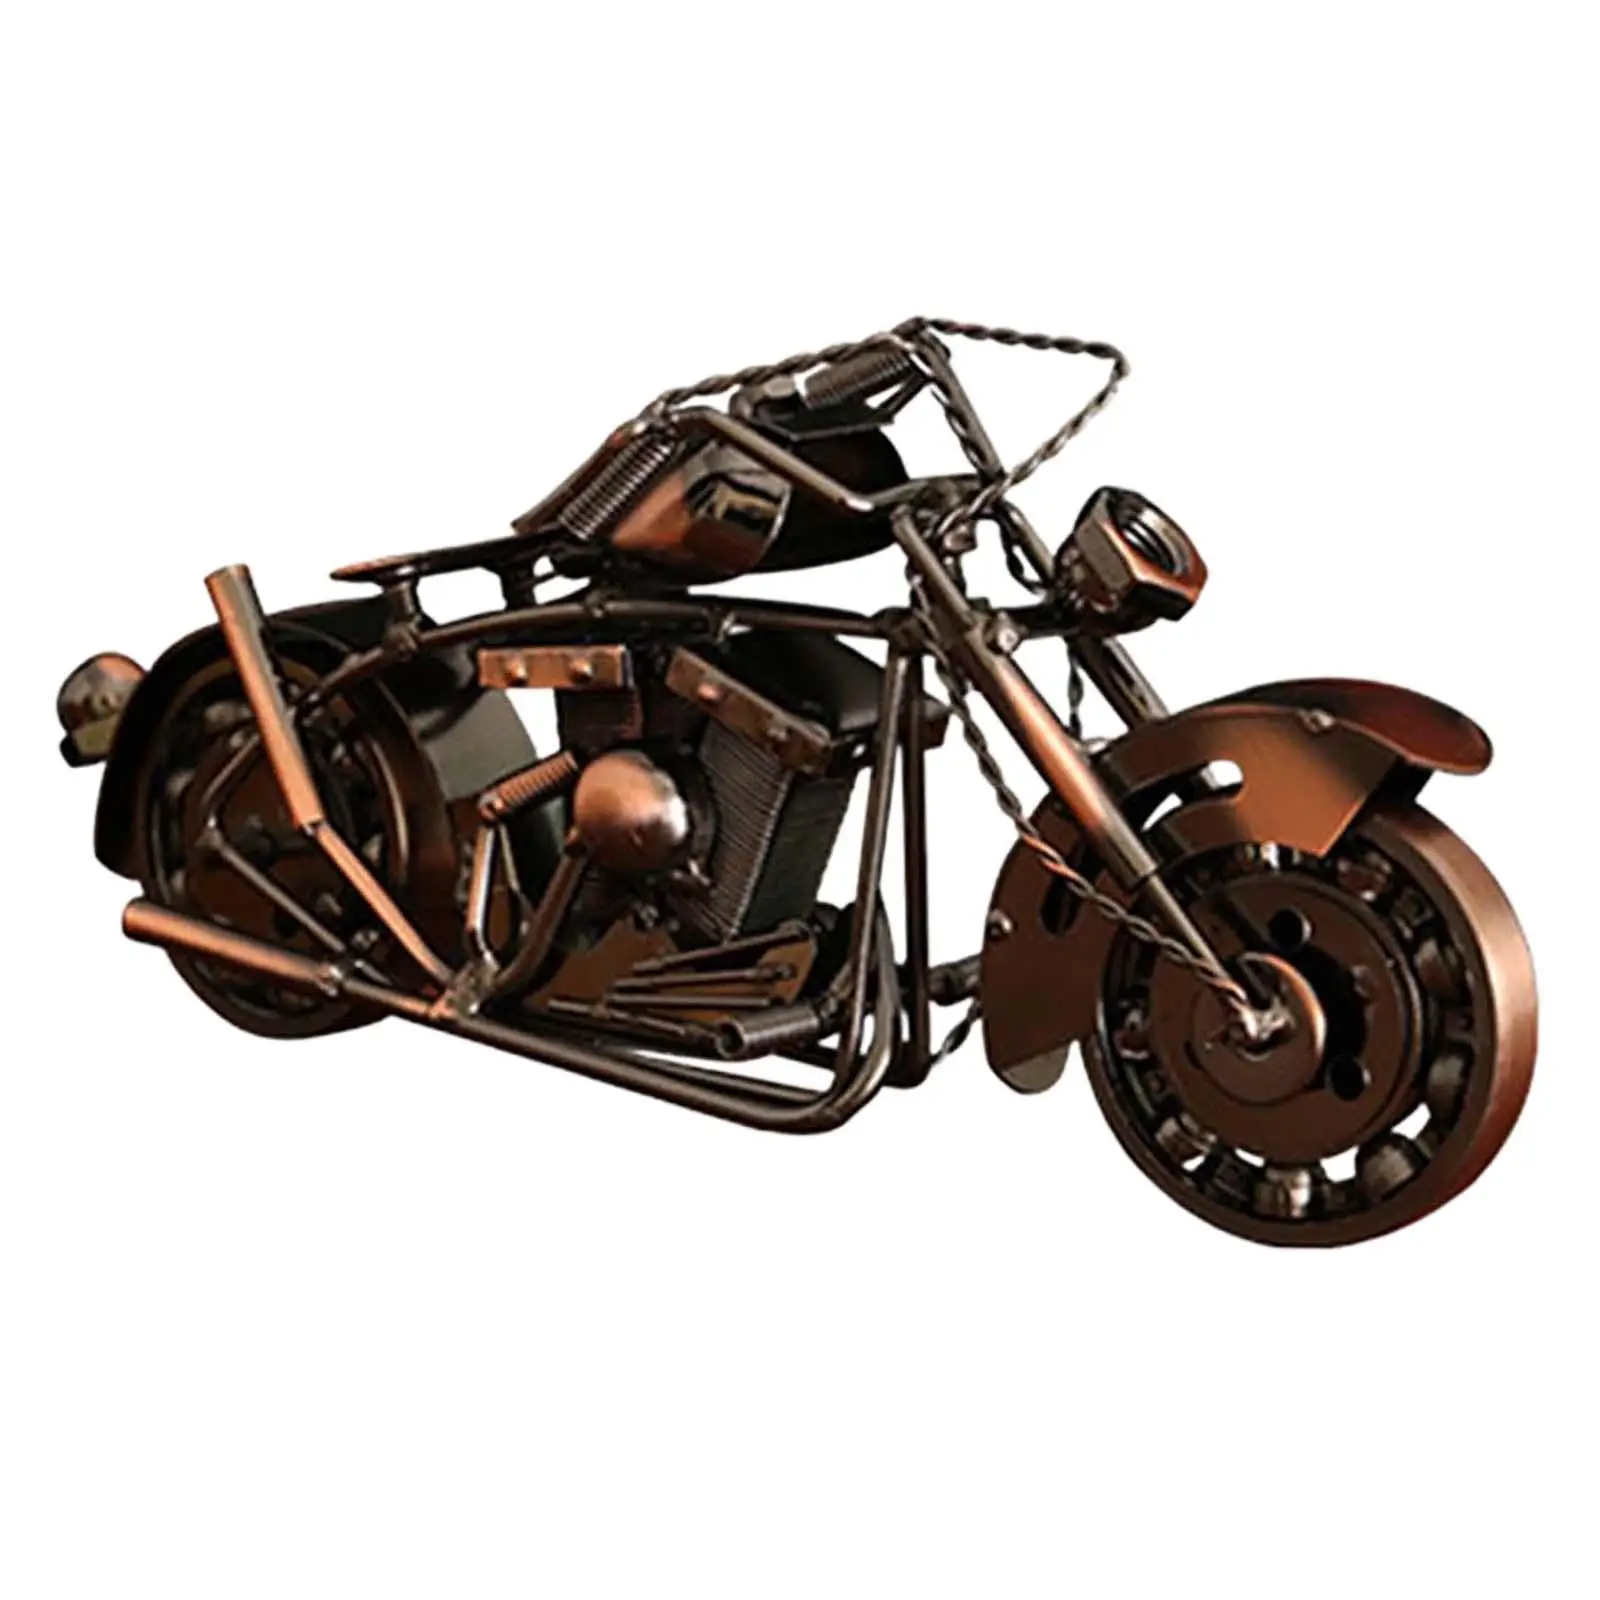 Motorcycle Model Motorbike Iron Art Sculpture 10x2.7x4.6inch Collection Sturdy